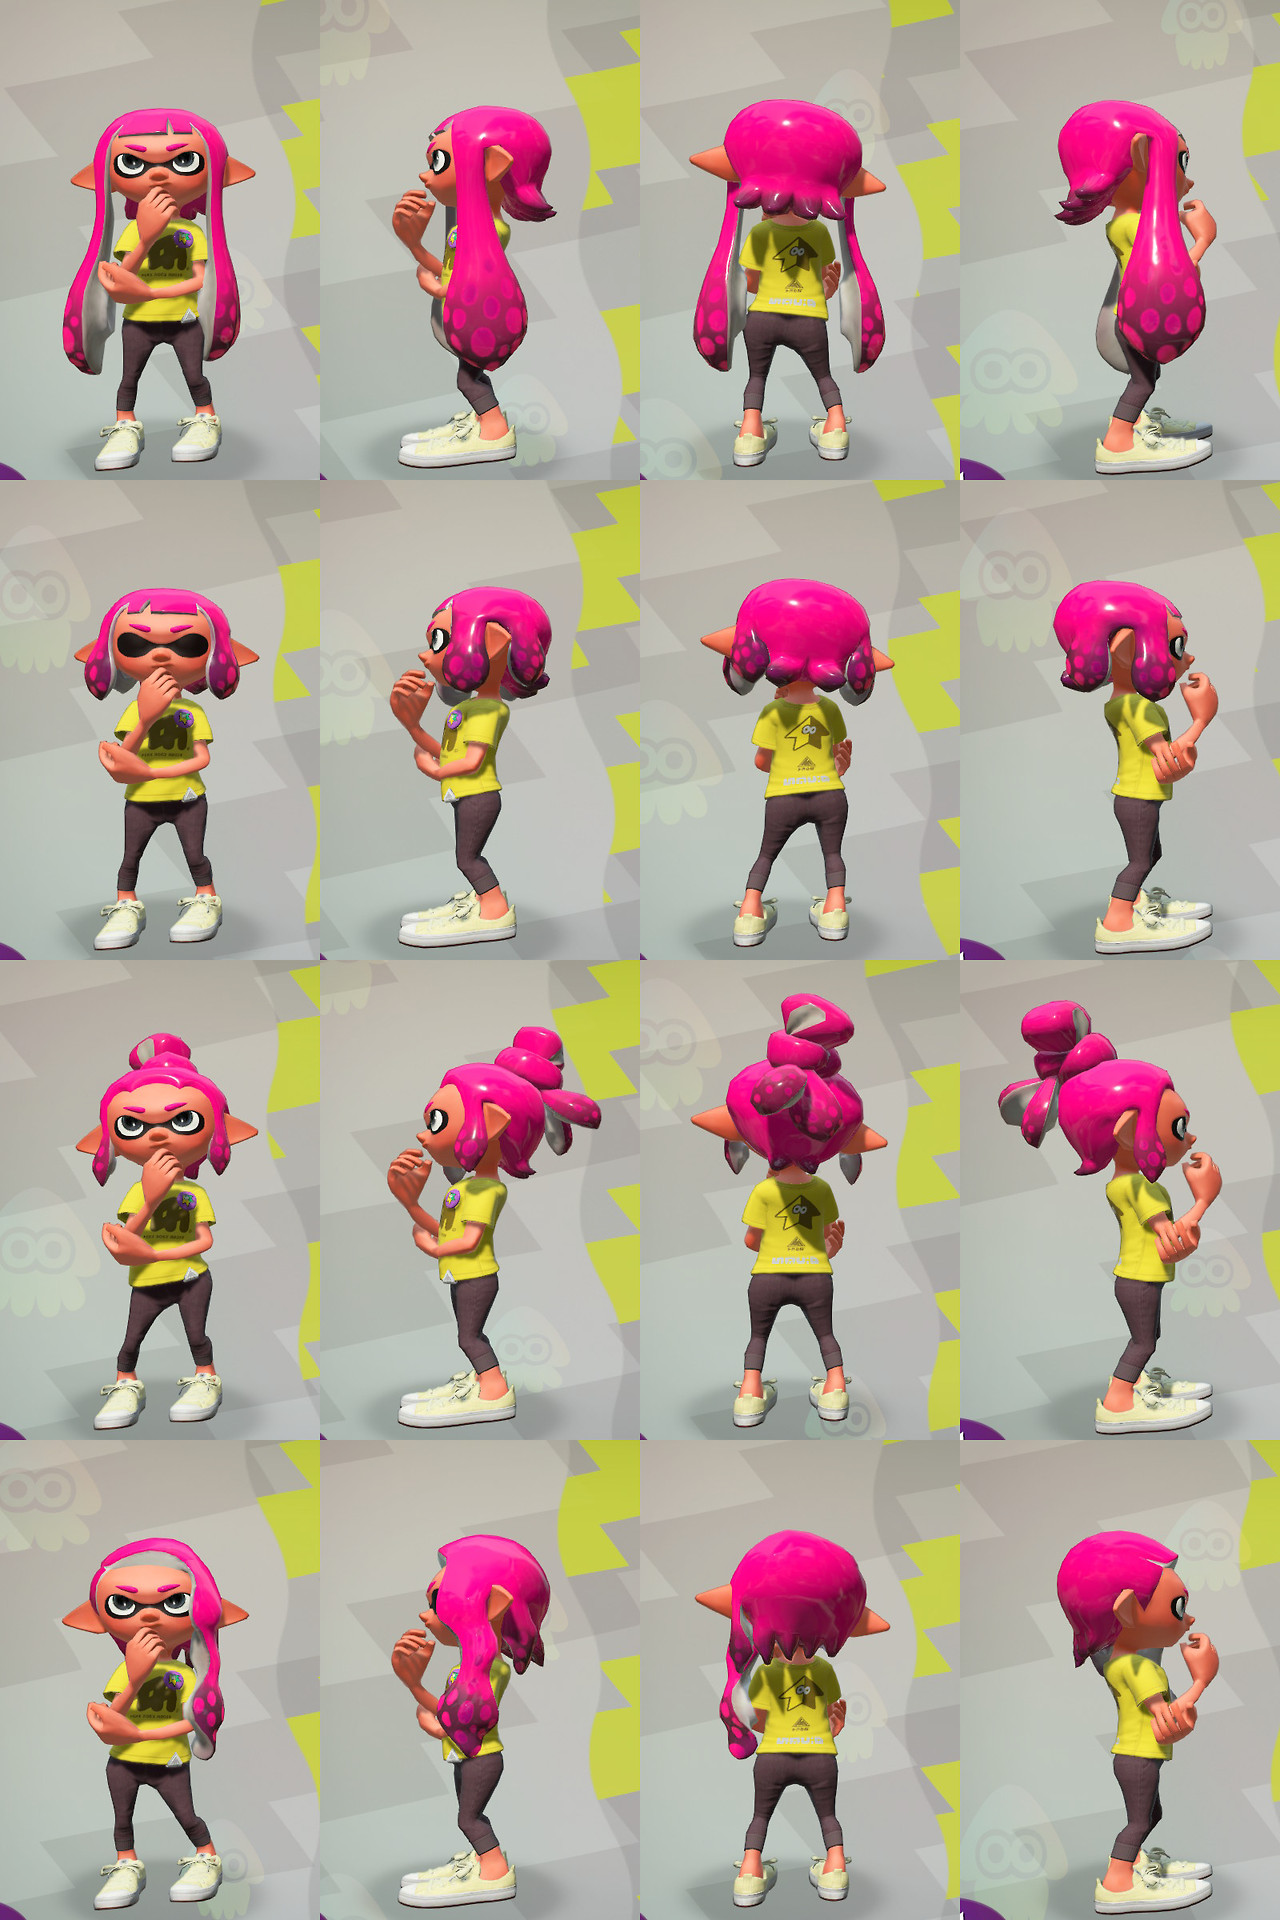 Inkling Girl Hairstyles
 Okay so now I have the Inkling Girl hair reference